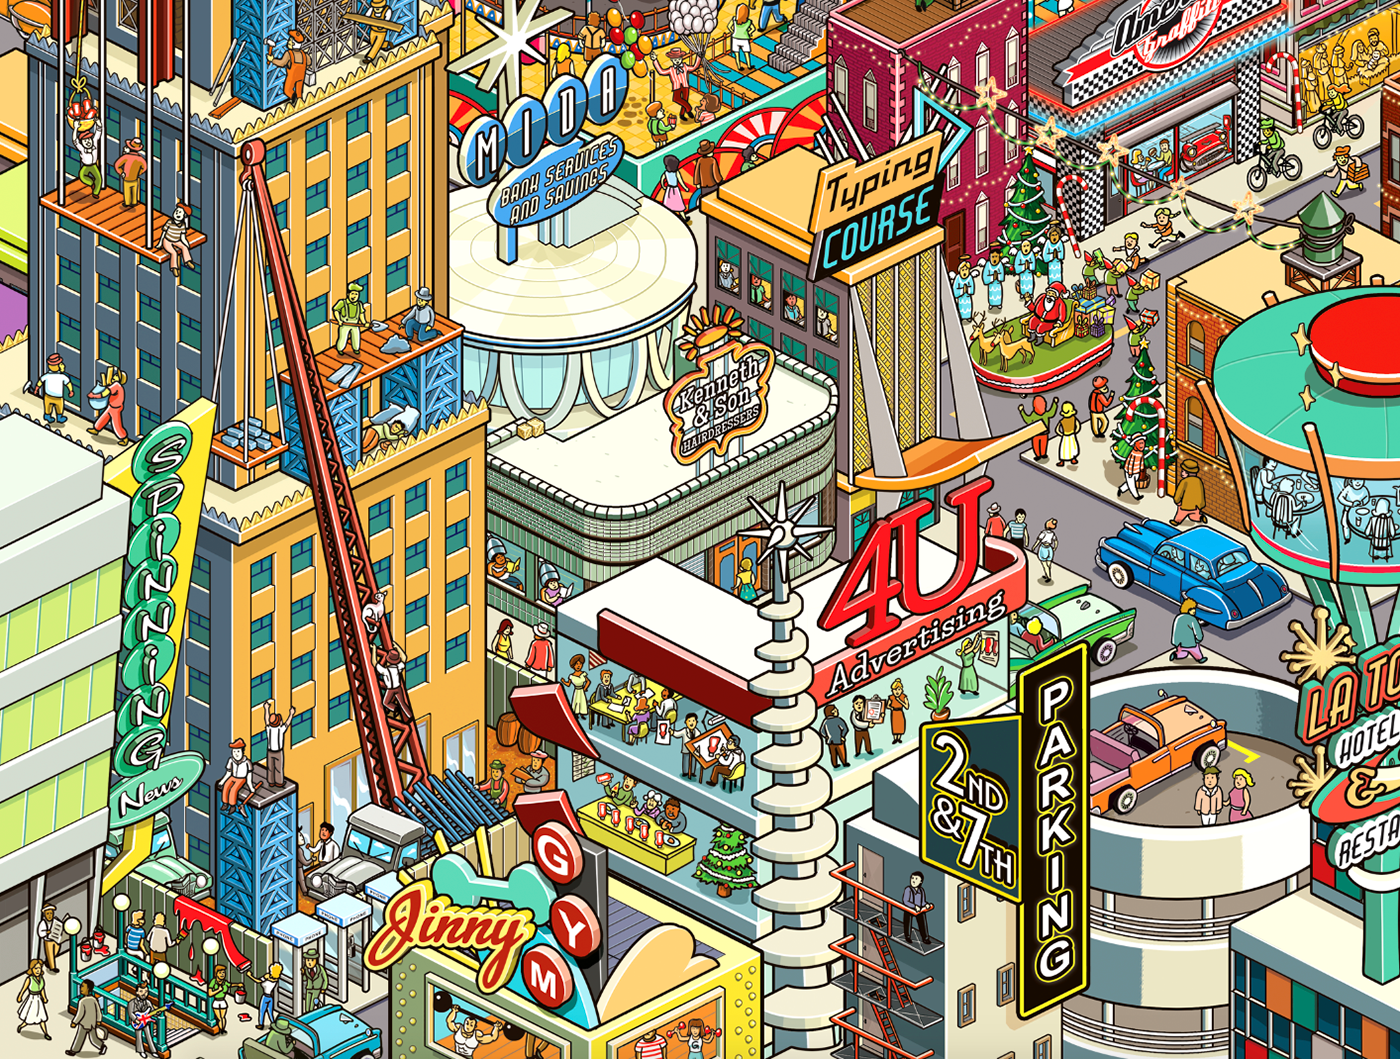 Pixel art Googie Isometric seek and find Where Is Wally detail New York RodHunt IC4Design city